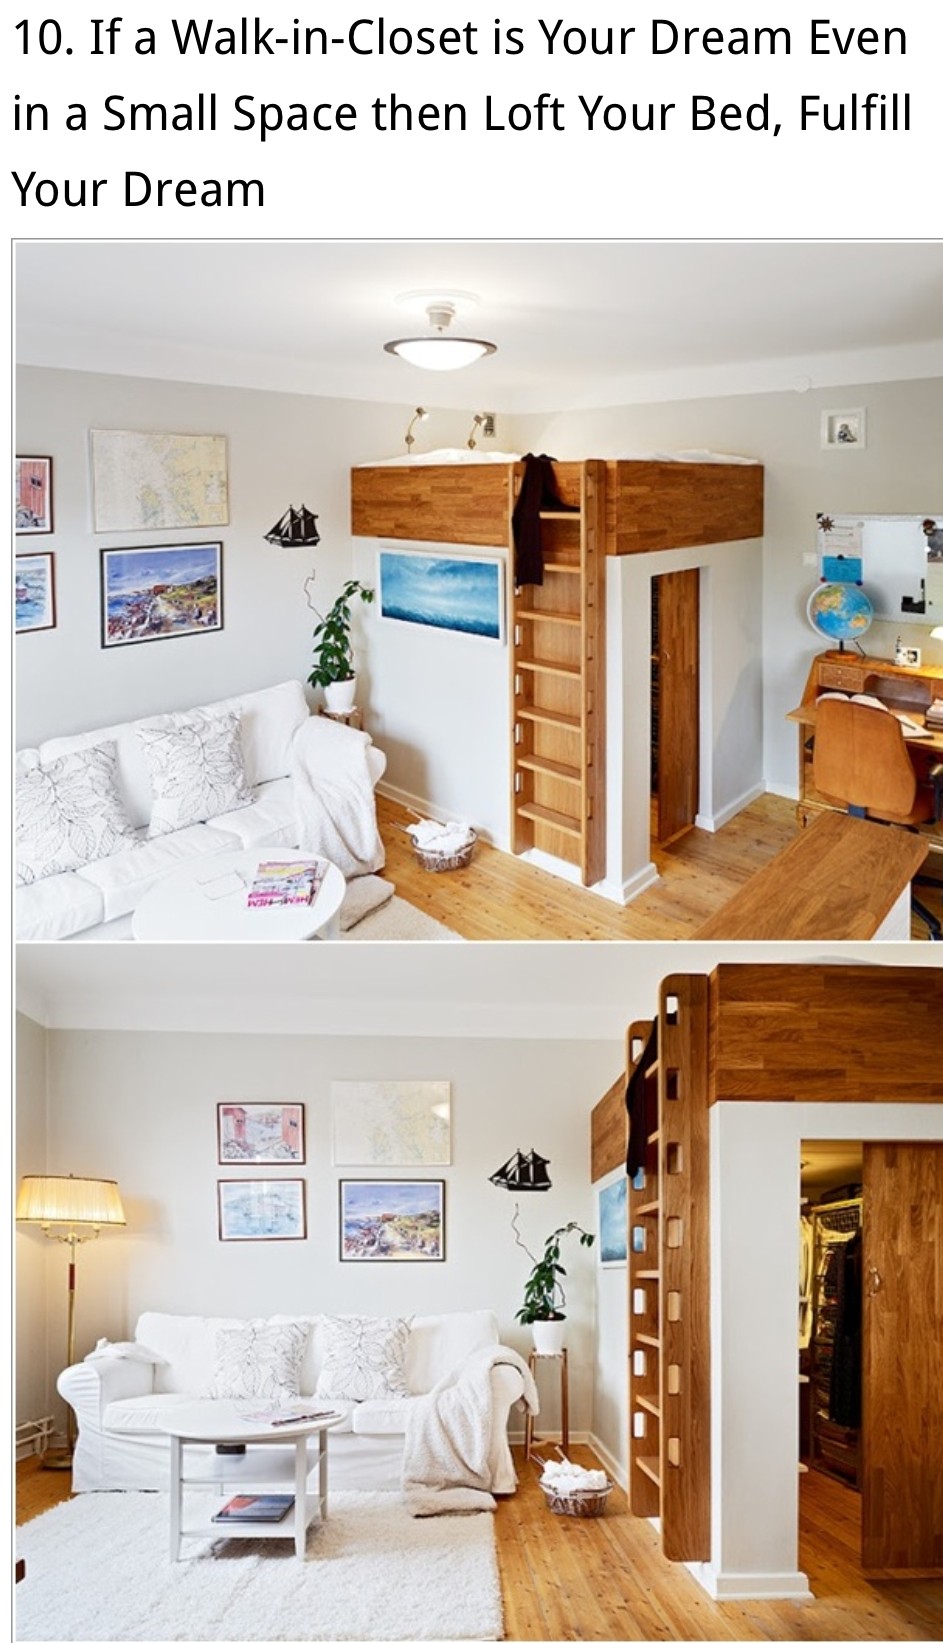 small bunk beds with storage